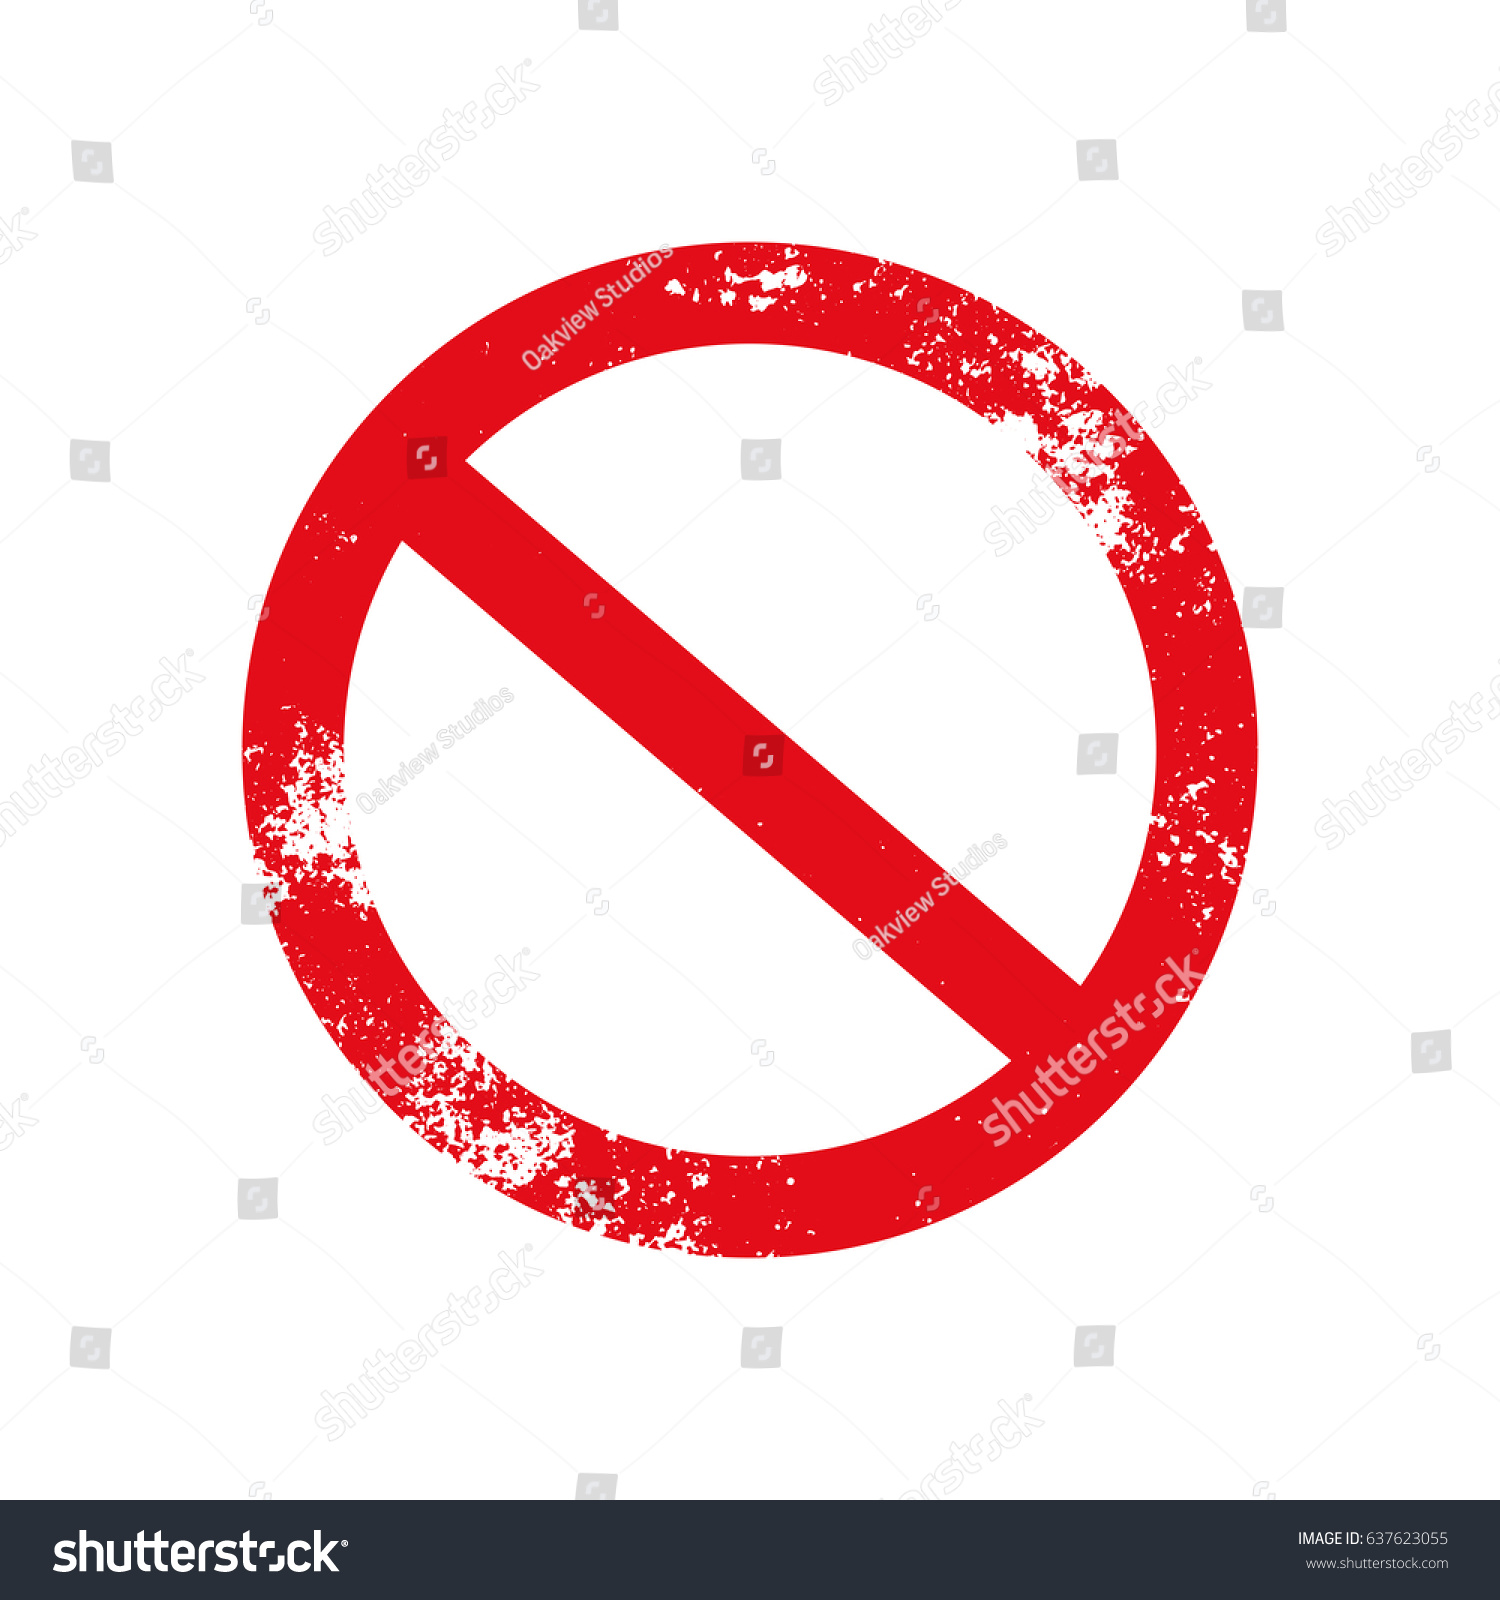 Prohibited grunge road sign, vector #637623055